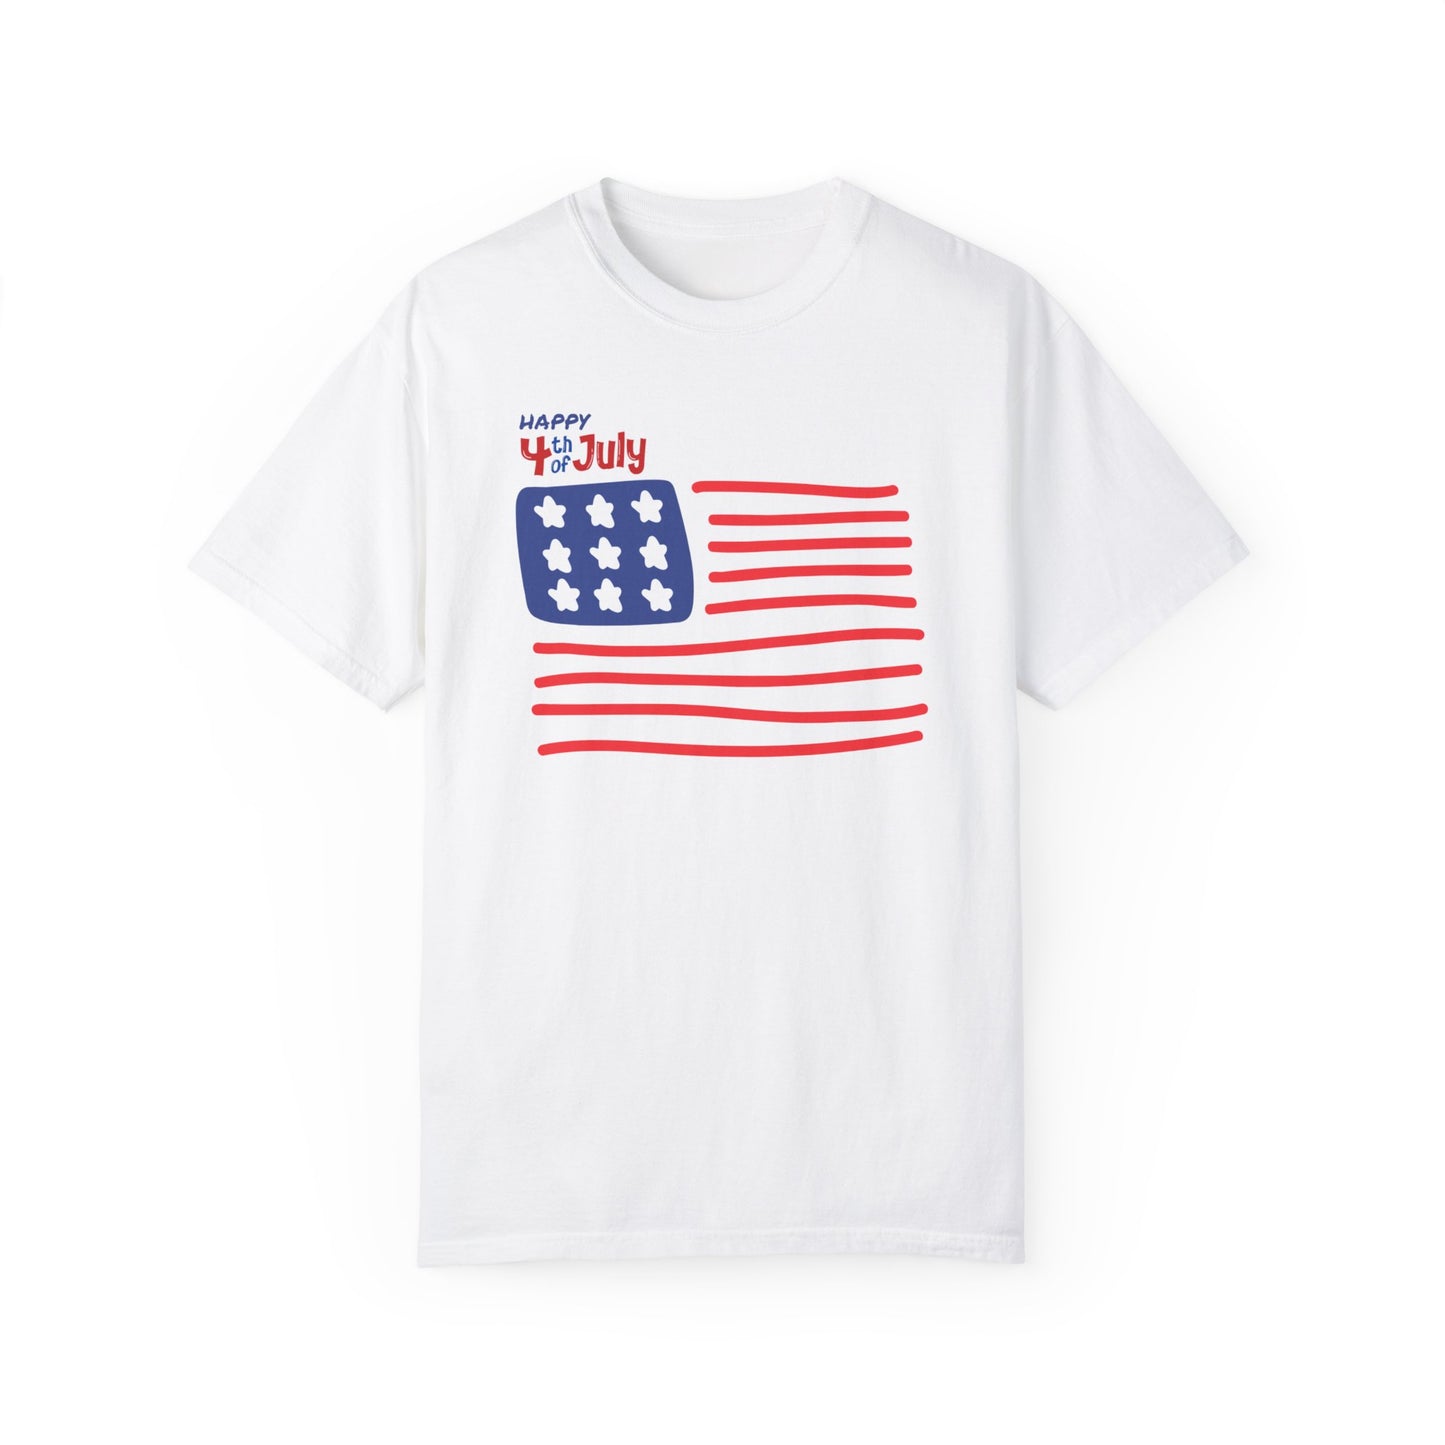 Happy 4th of July Unisex Garment-Dyed T-shirt